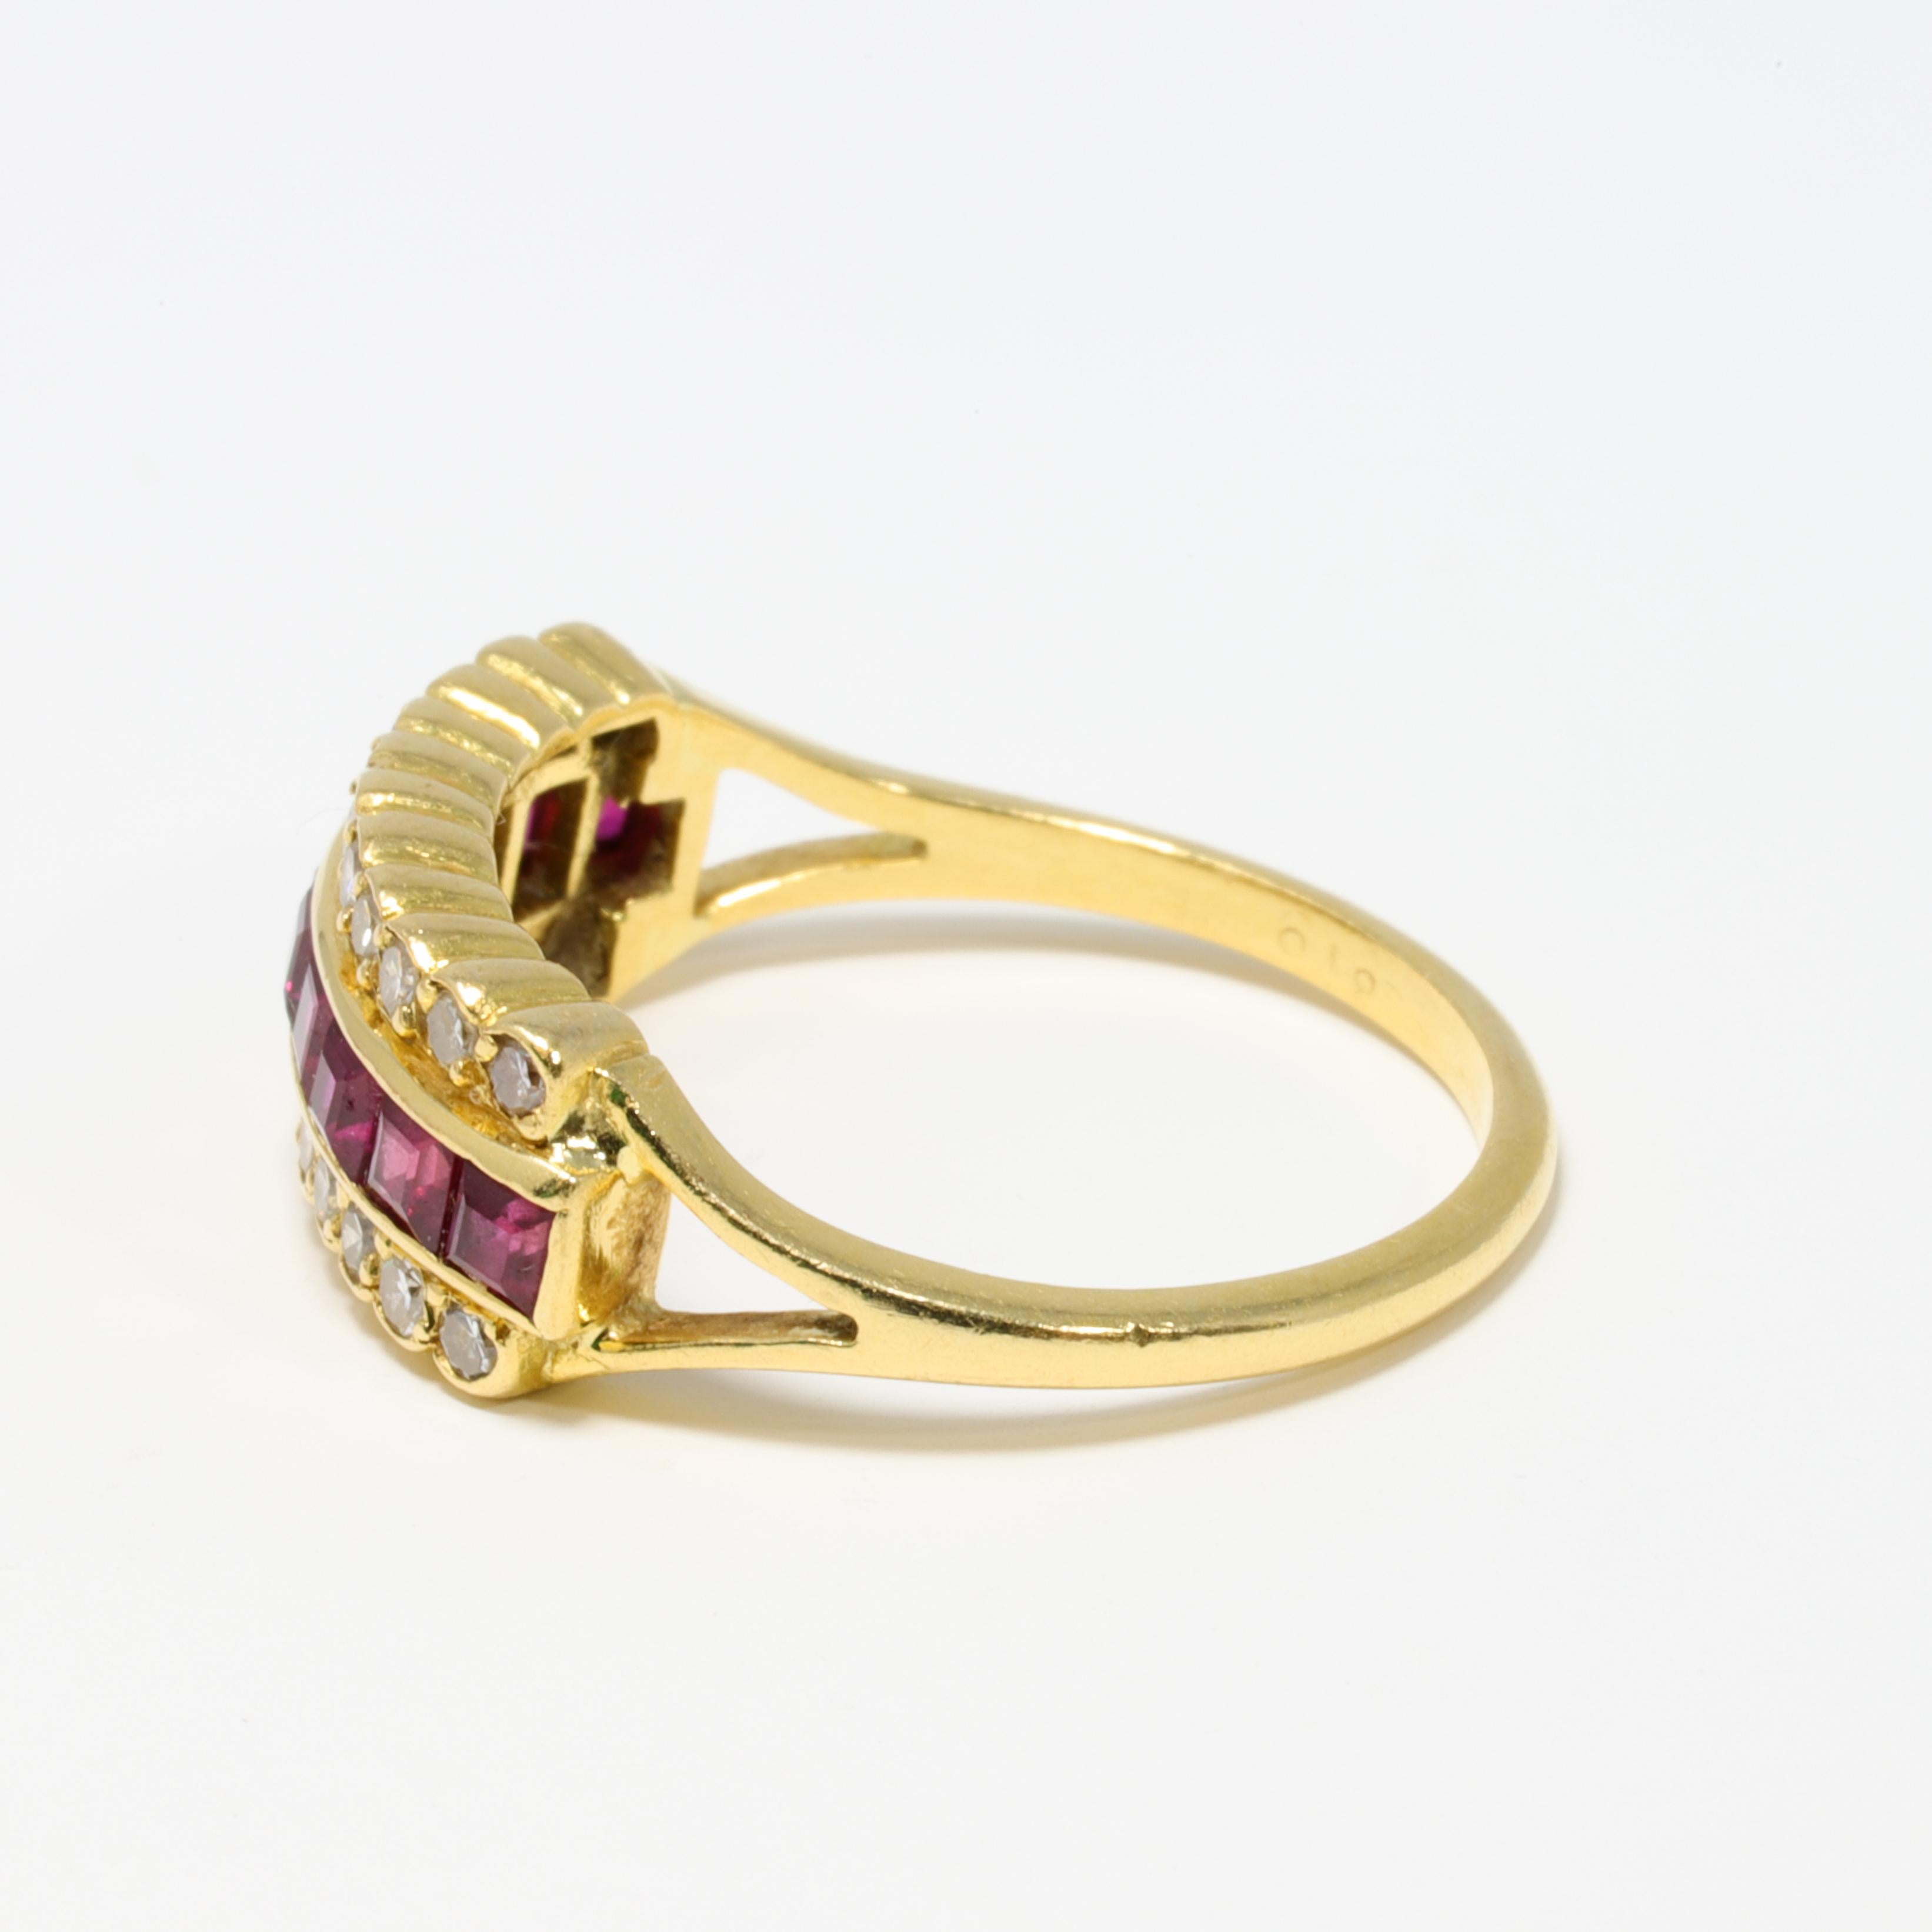 Women's 14 Karat Yellow Gold Square Cut .45 Carat Ruby and Round Diamond Fashion Ring For Sale